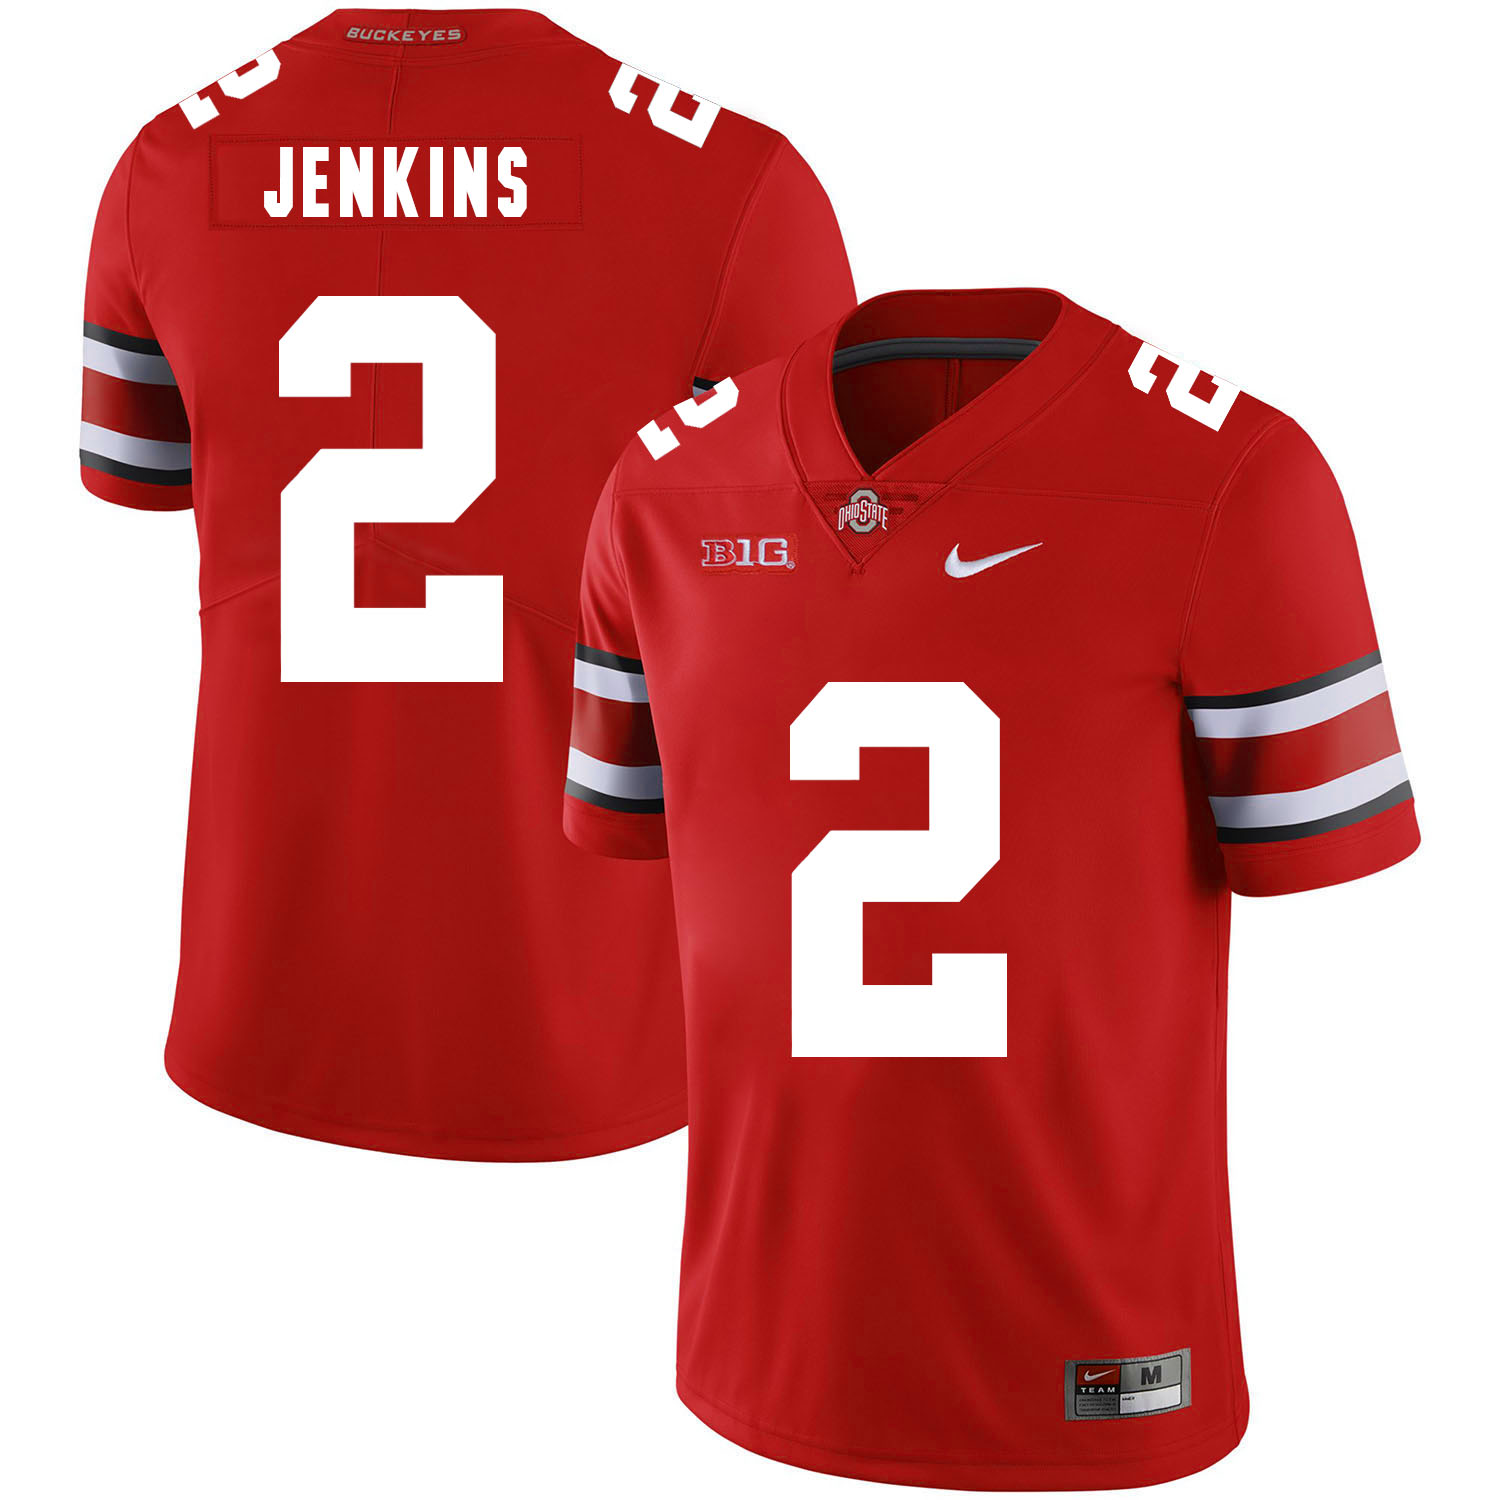 Ohio State Buckeyes 2 Malcolm Jenkins Red Nike College Football Jersey